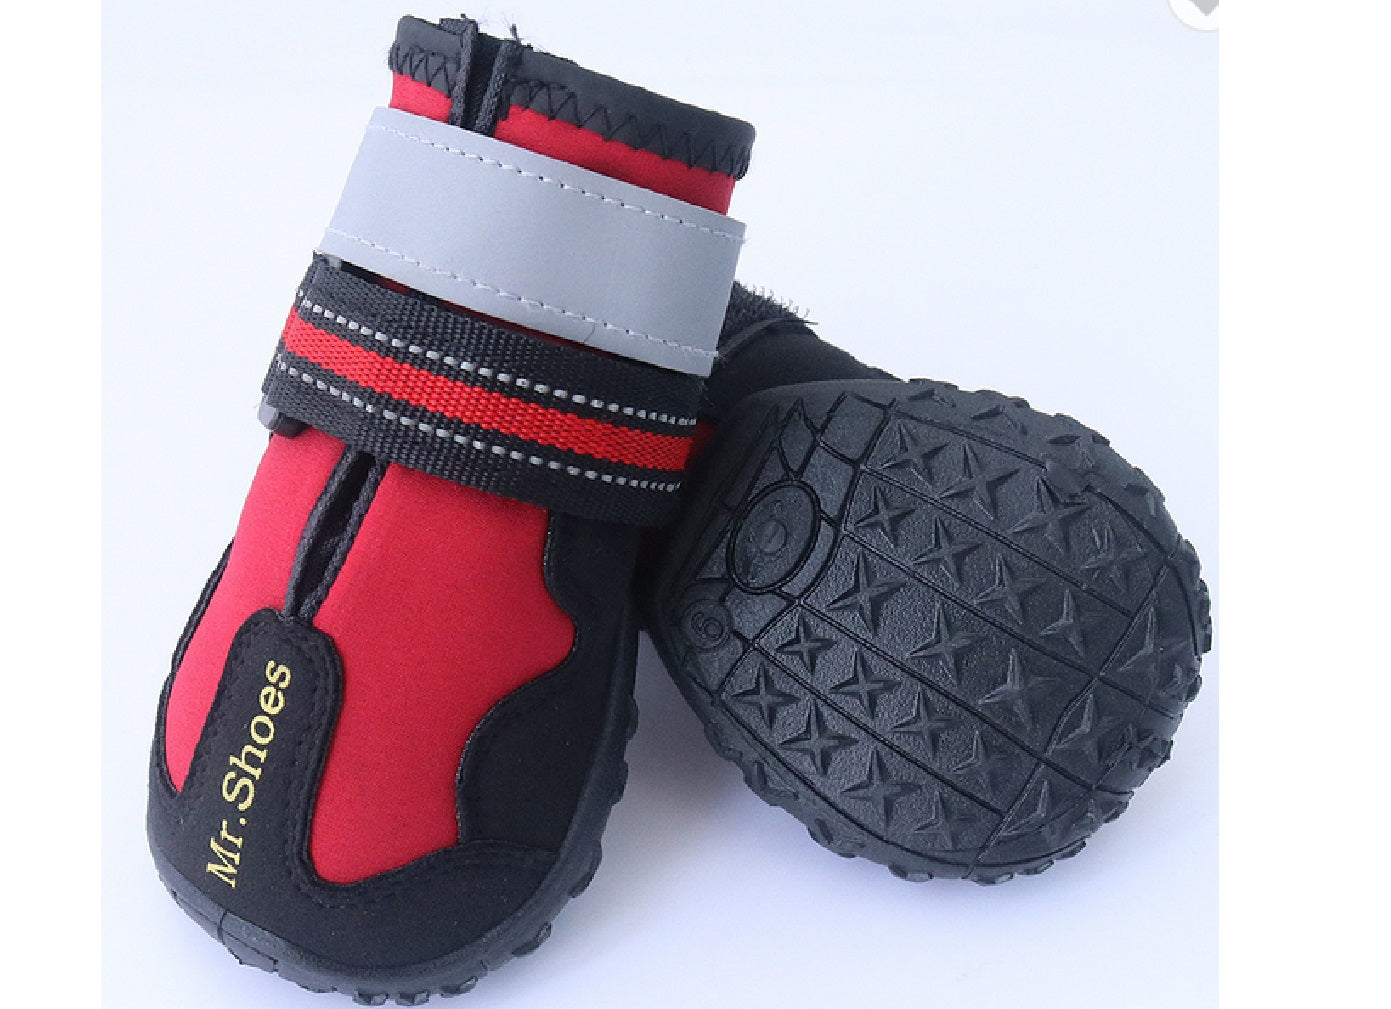 Mr Shoes - Pet Dog Cat Puppy Cat Shoes Boots Waterproof Anti-Slip Paw Protector